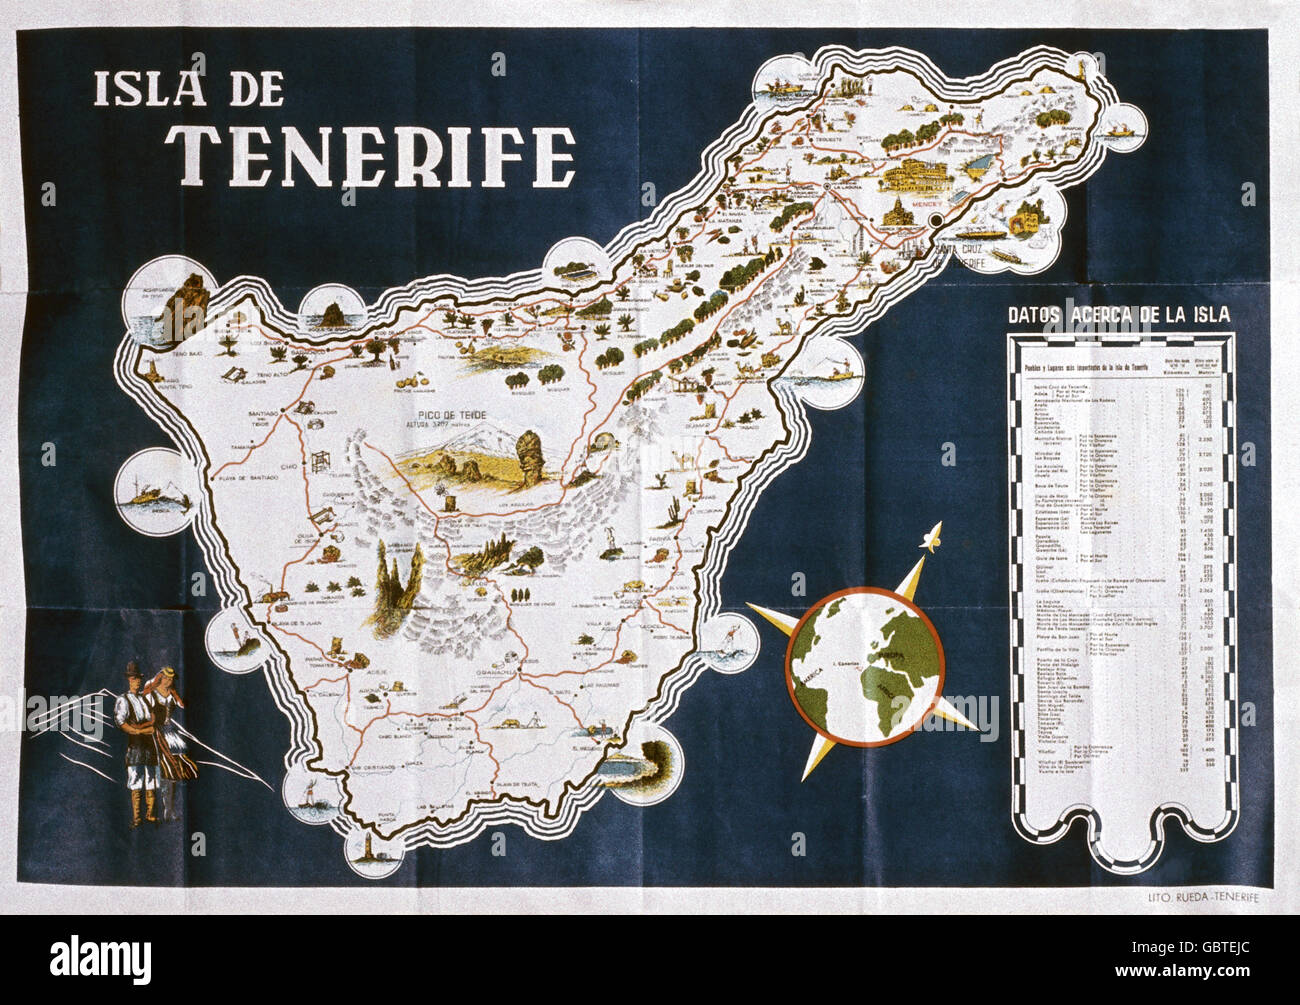 geography / travel, Spain, Canary Islands, Tenerife, topographic map, 1958, Additional-Rights-Clearences-Not Available Stock Photo